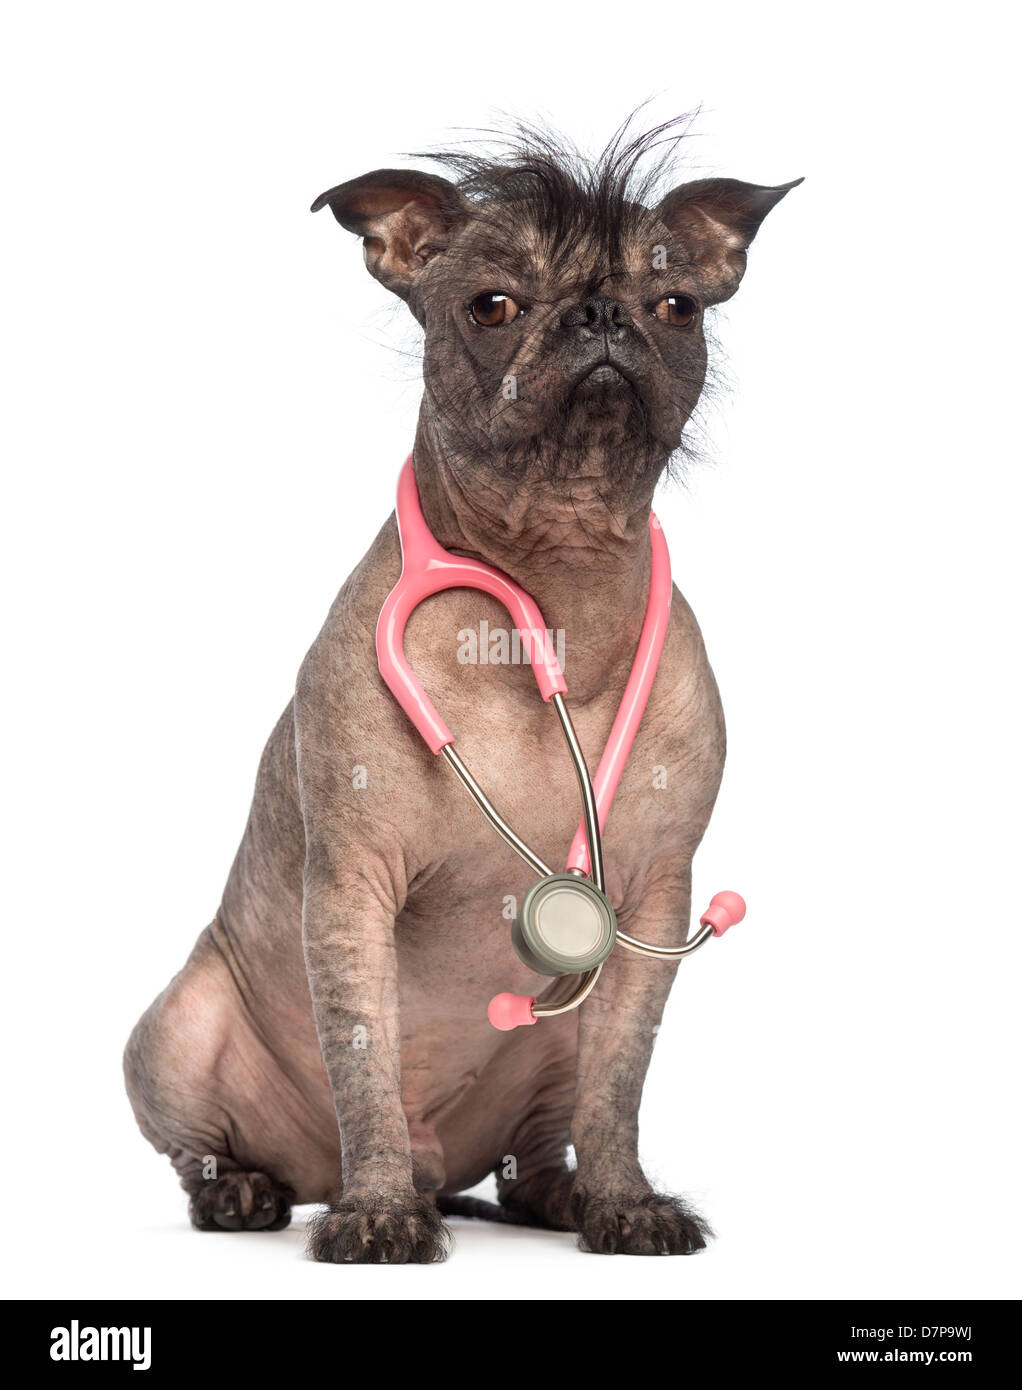 Hairless Mixed breed, a cross between a French Bulldog and Chinese Crested Dog, wearing stethoscope against white background Stock Photo